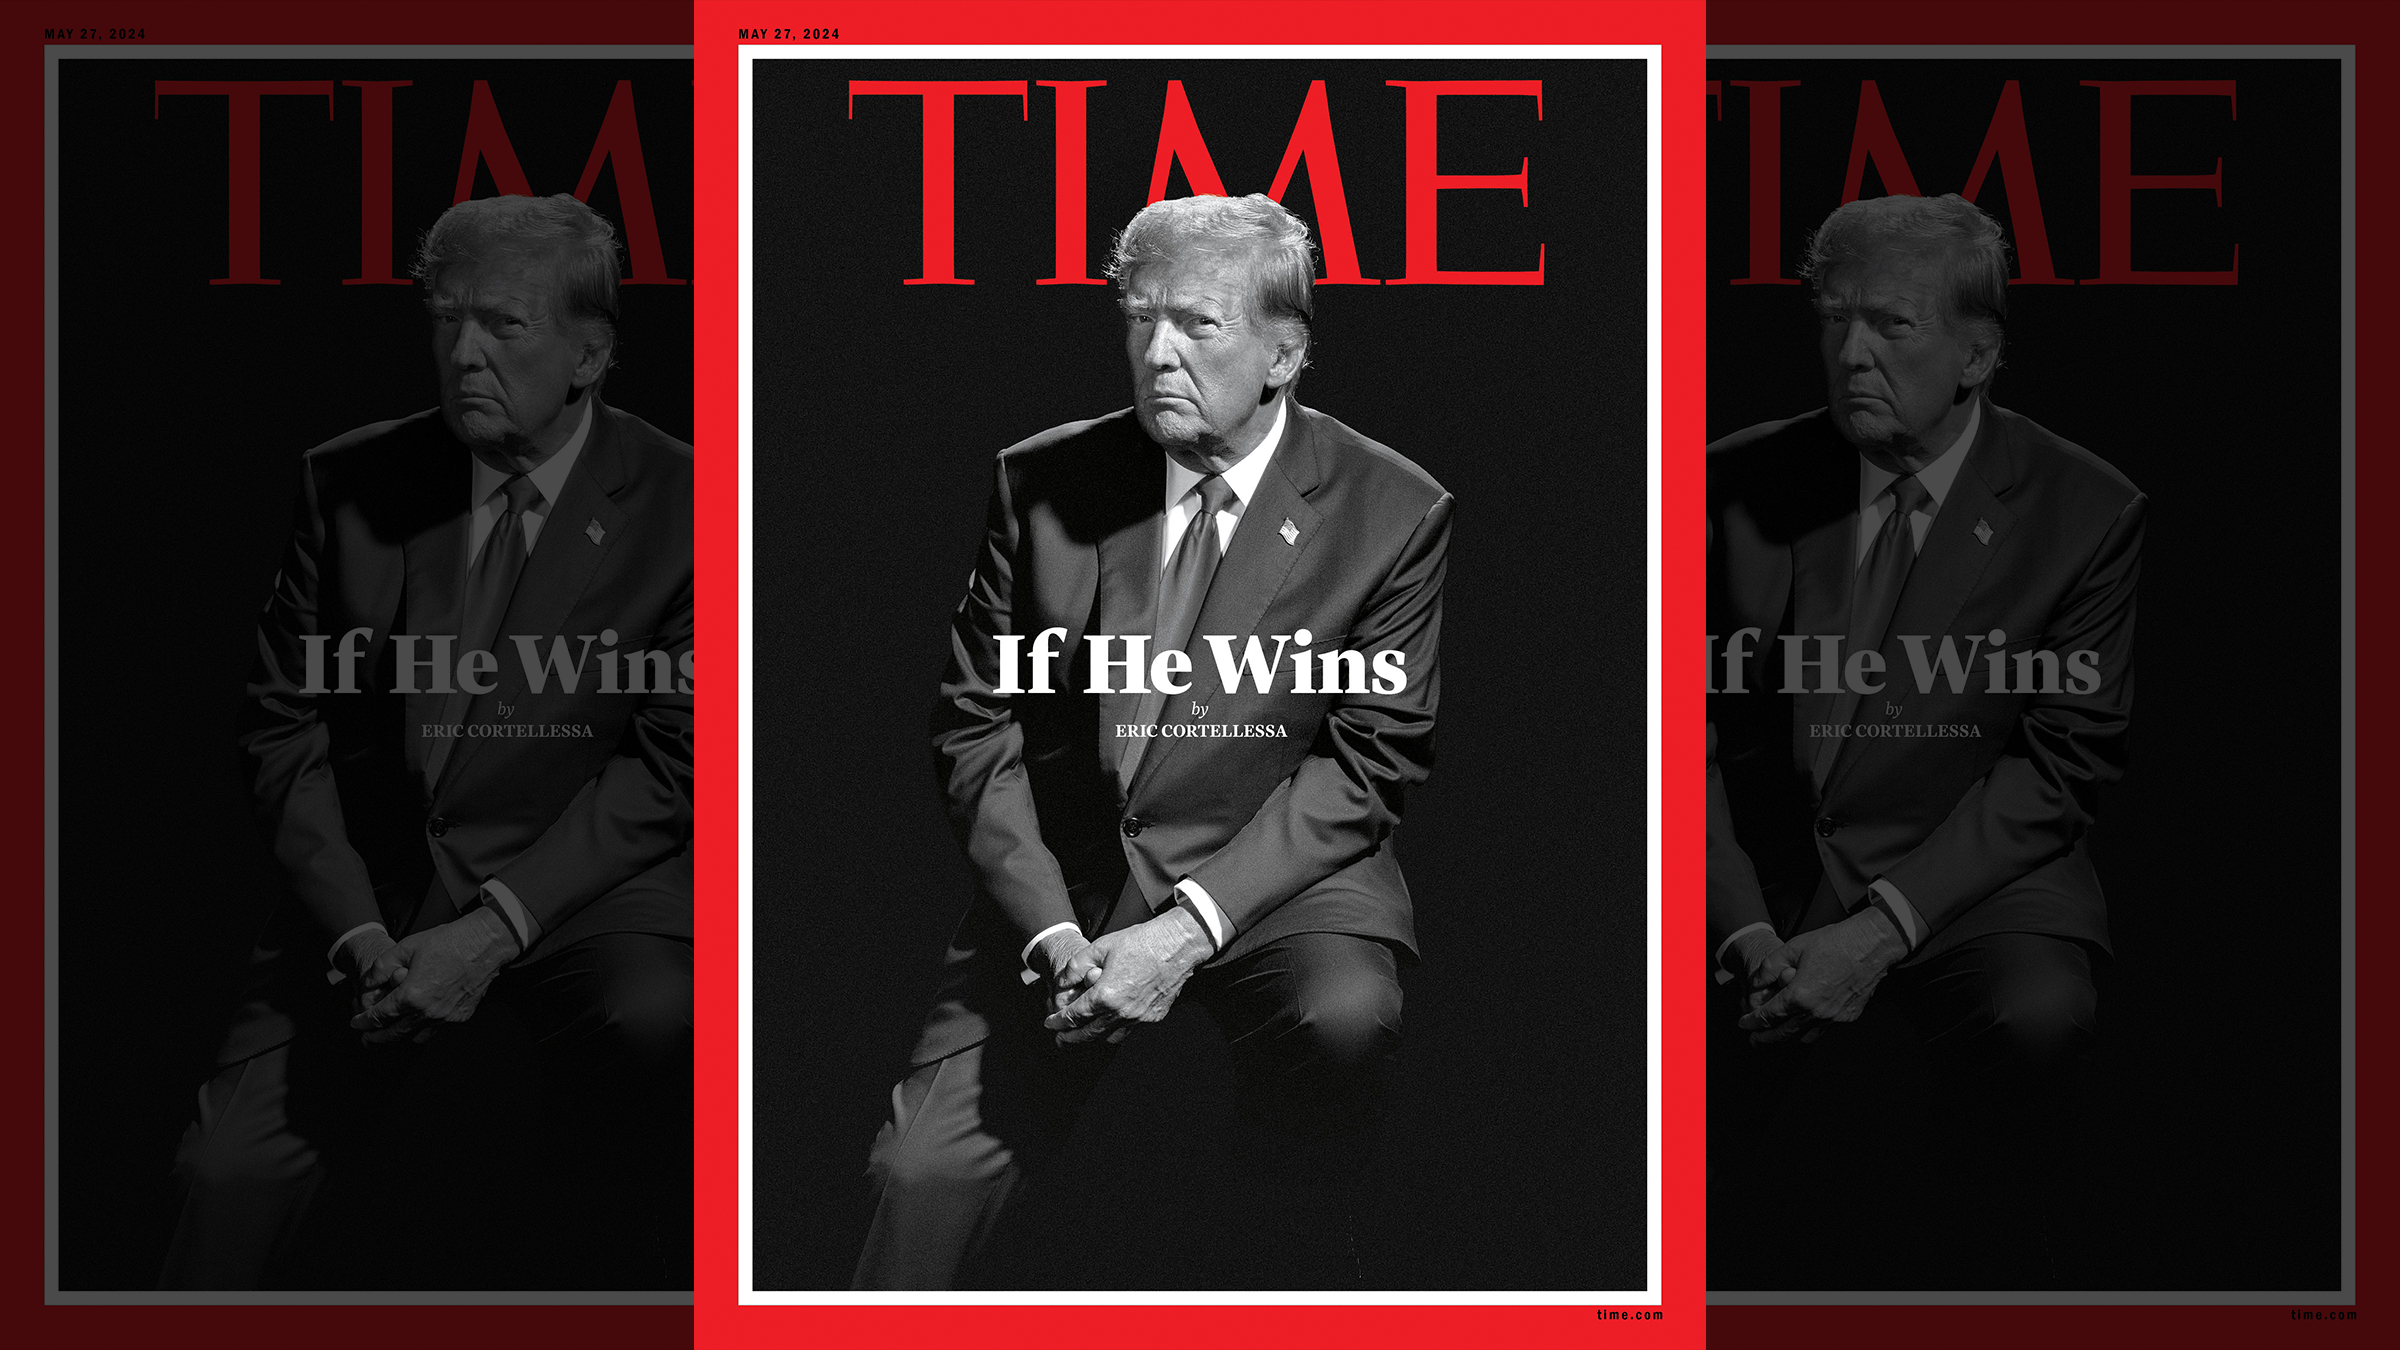 The Story Behind Time’s ‘If He Wins’ Donald Trump Cover